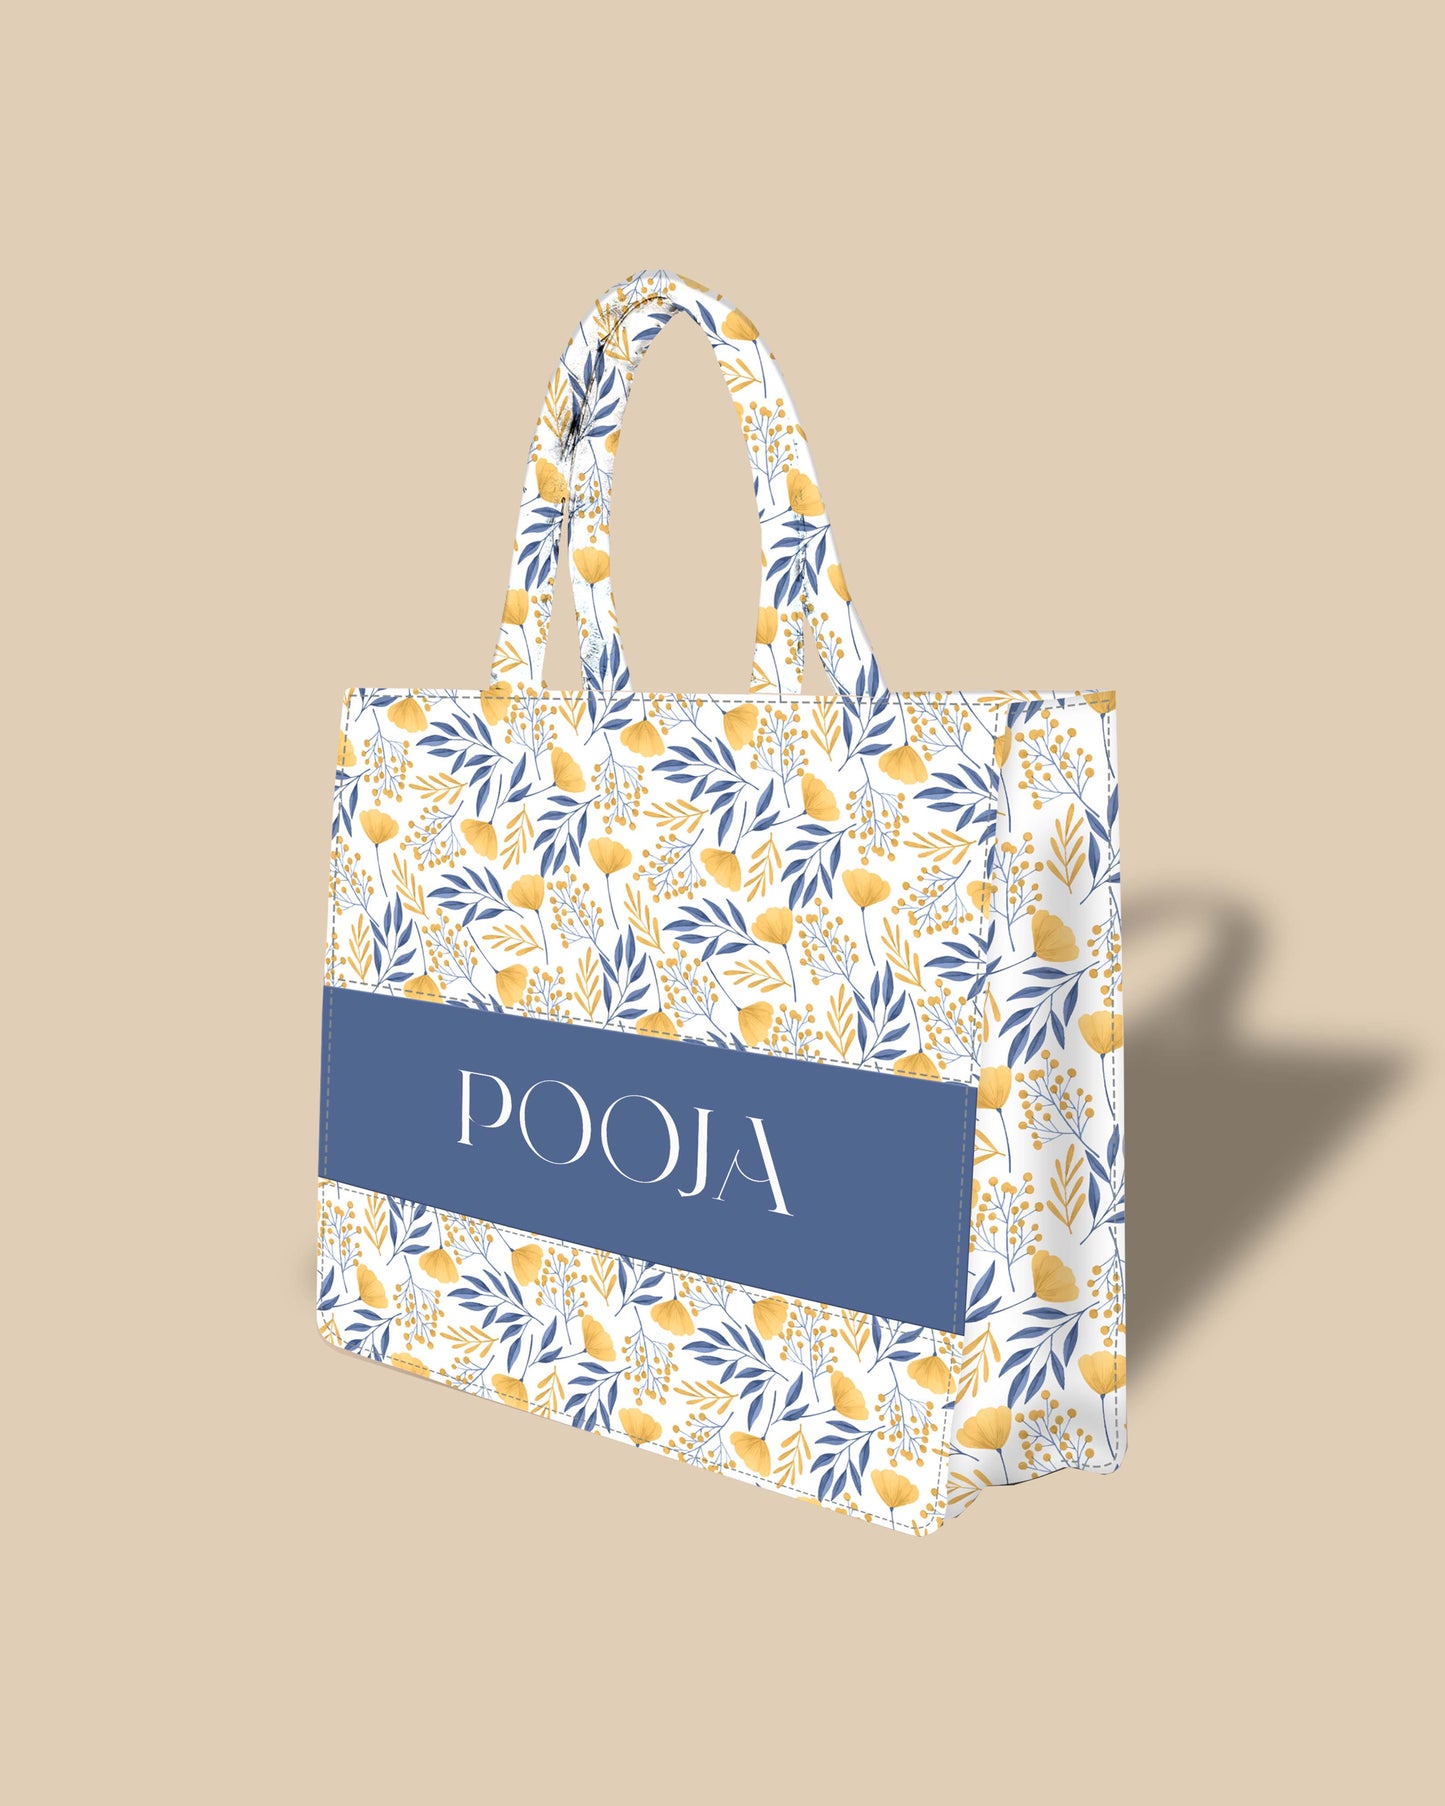 Customized Tote Bag Designed With Summer Botnical Flowers And Leaves